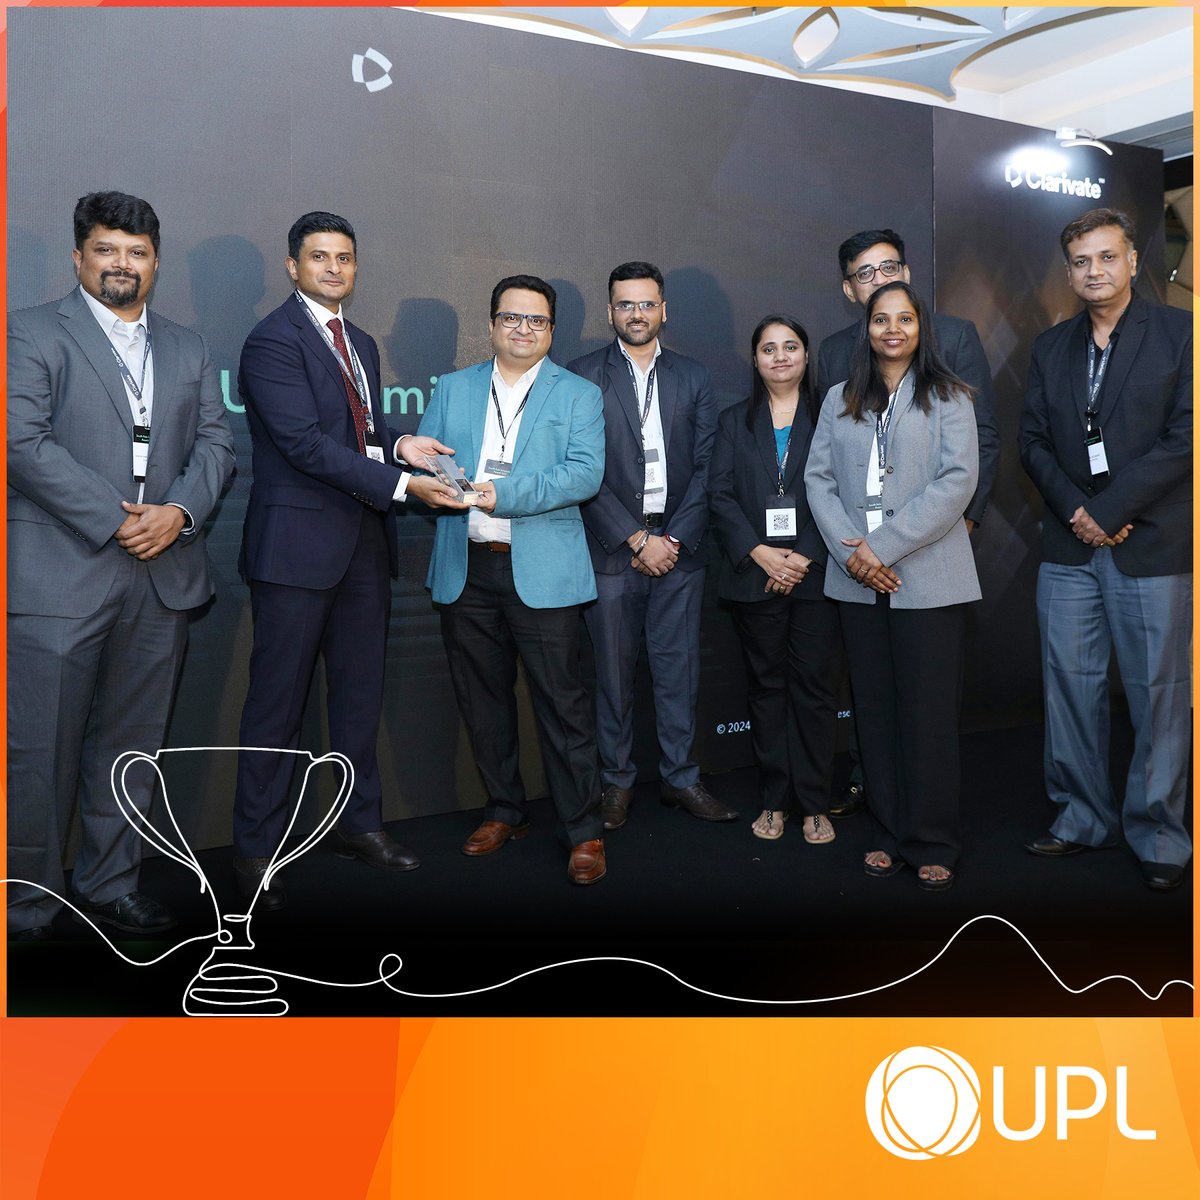 We are thrilled to announce that UPL Ltd has once again been distinguished at the Clarivate South Asia Innovation Award 2024, winning in the Agribusiness category for the 4th consecutive year. It's a testament to our innovation & commitment to pioneering agricultural solutions.